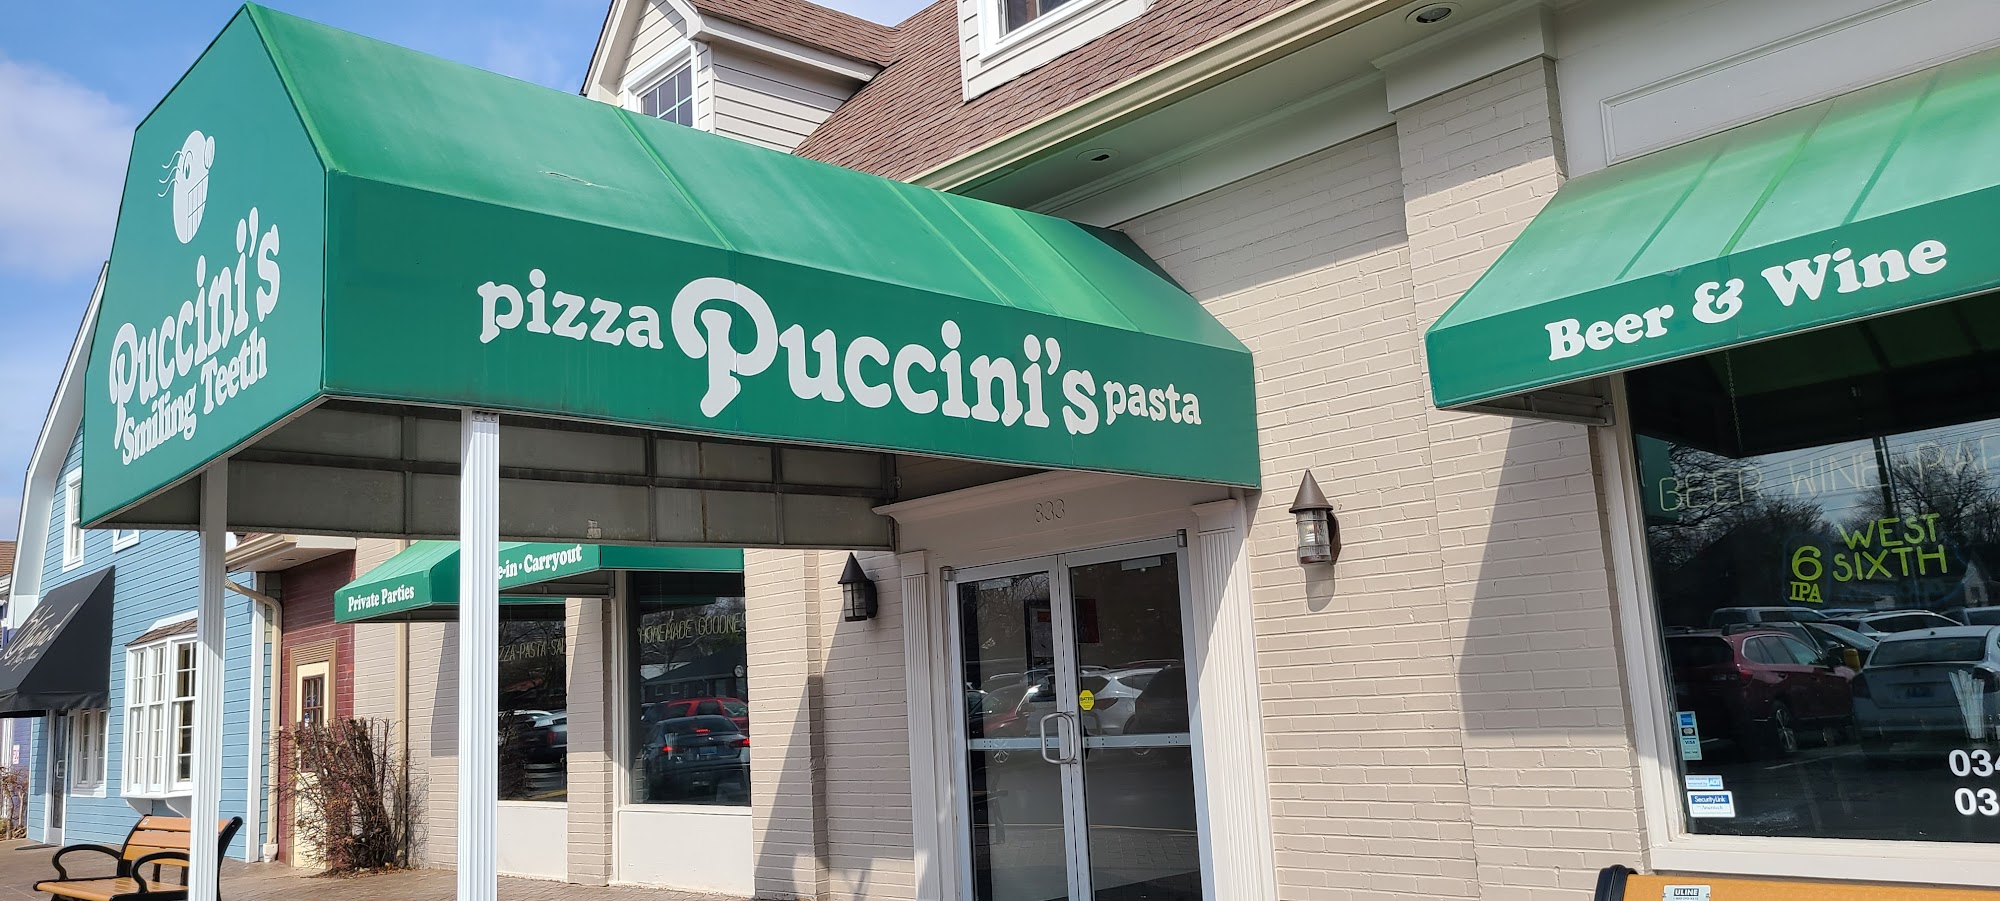 Puccini's Pizza Pasta-Chevy Chase Place